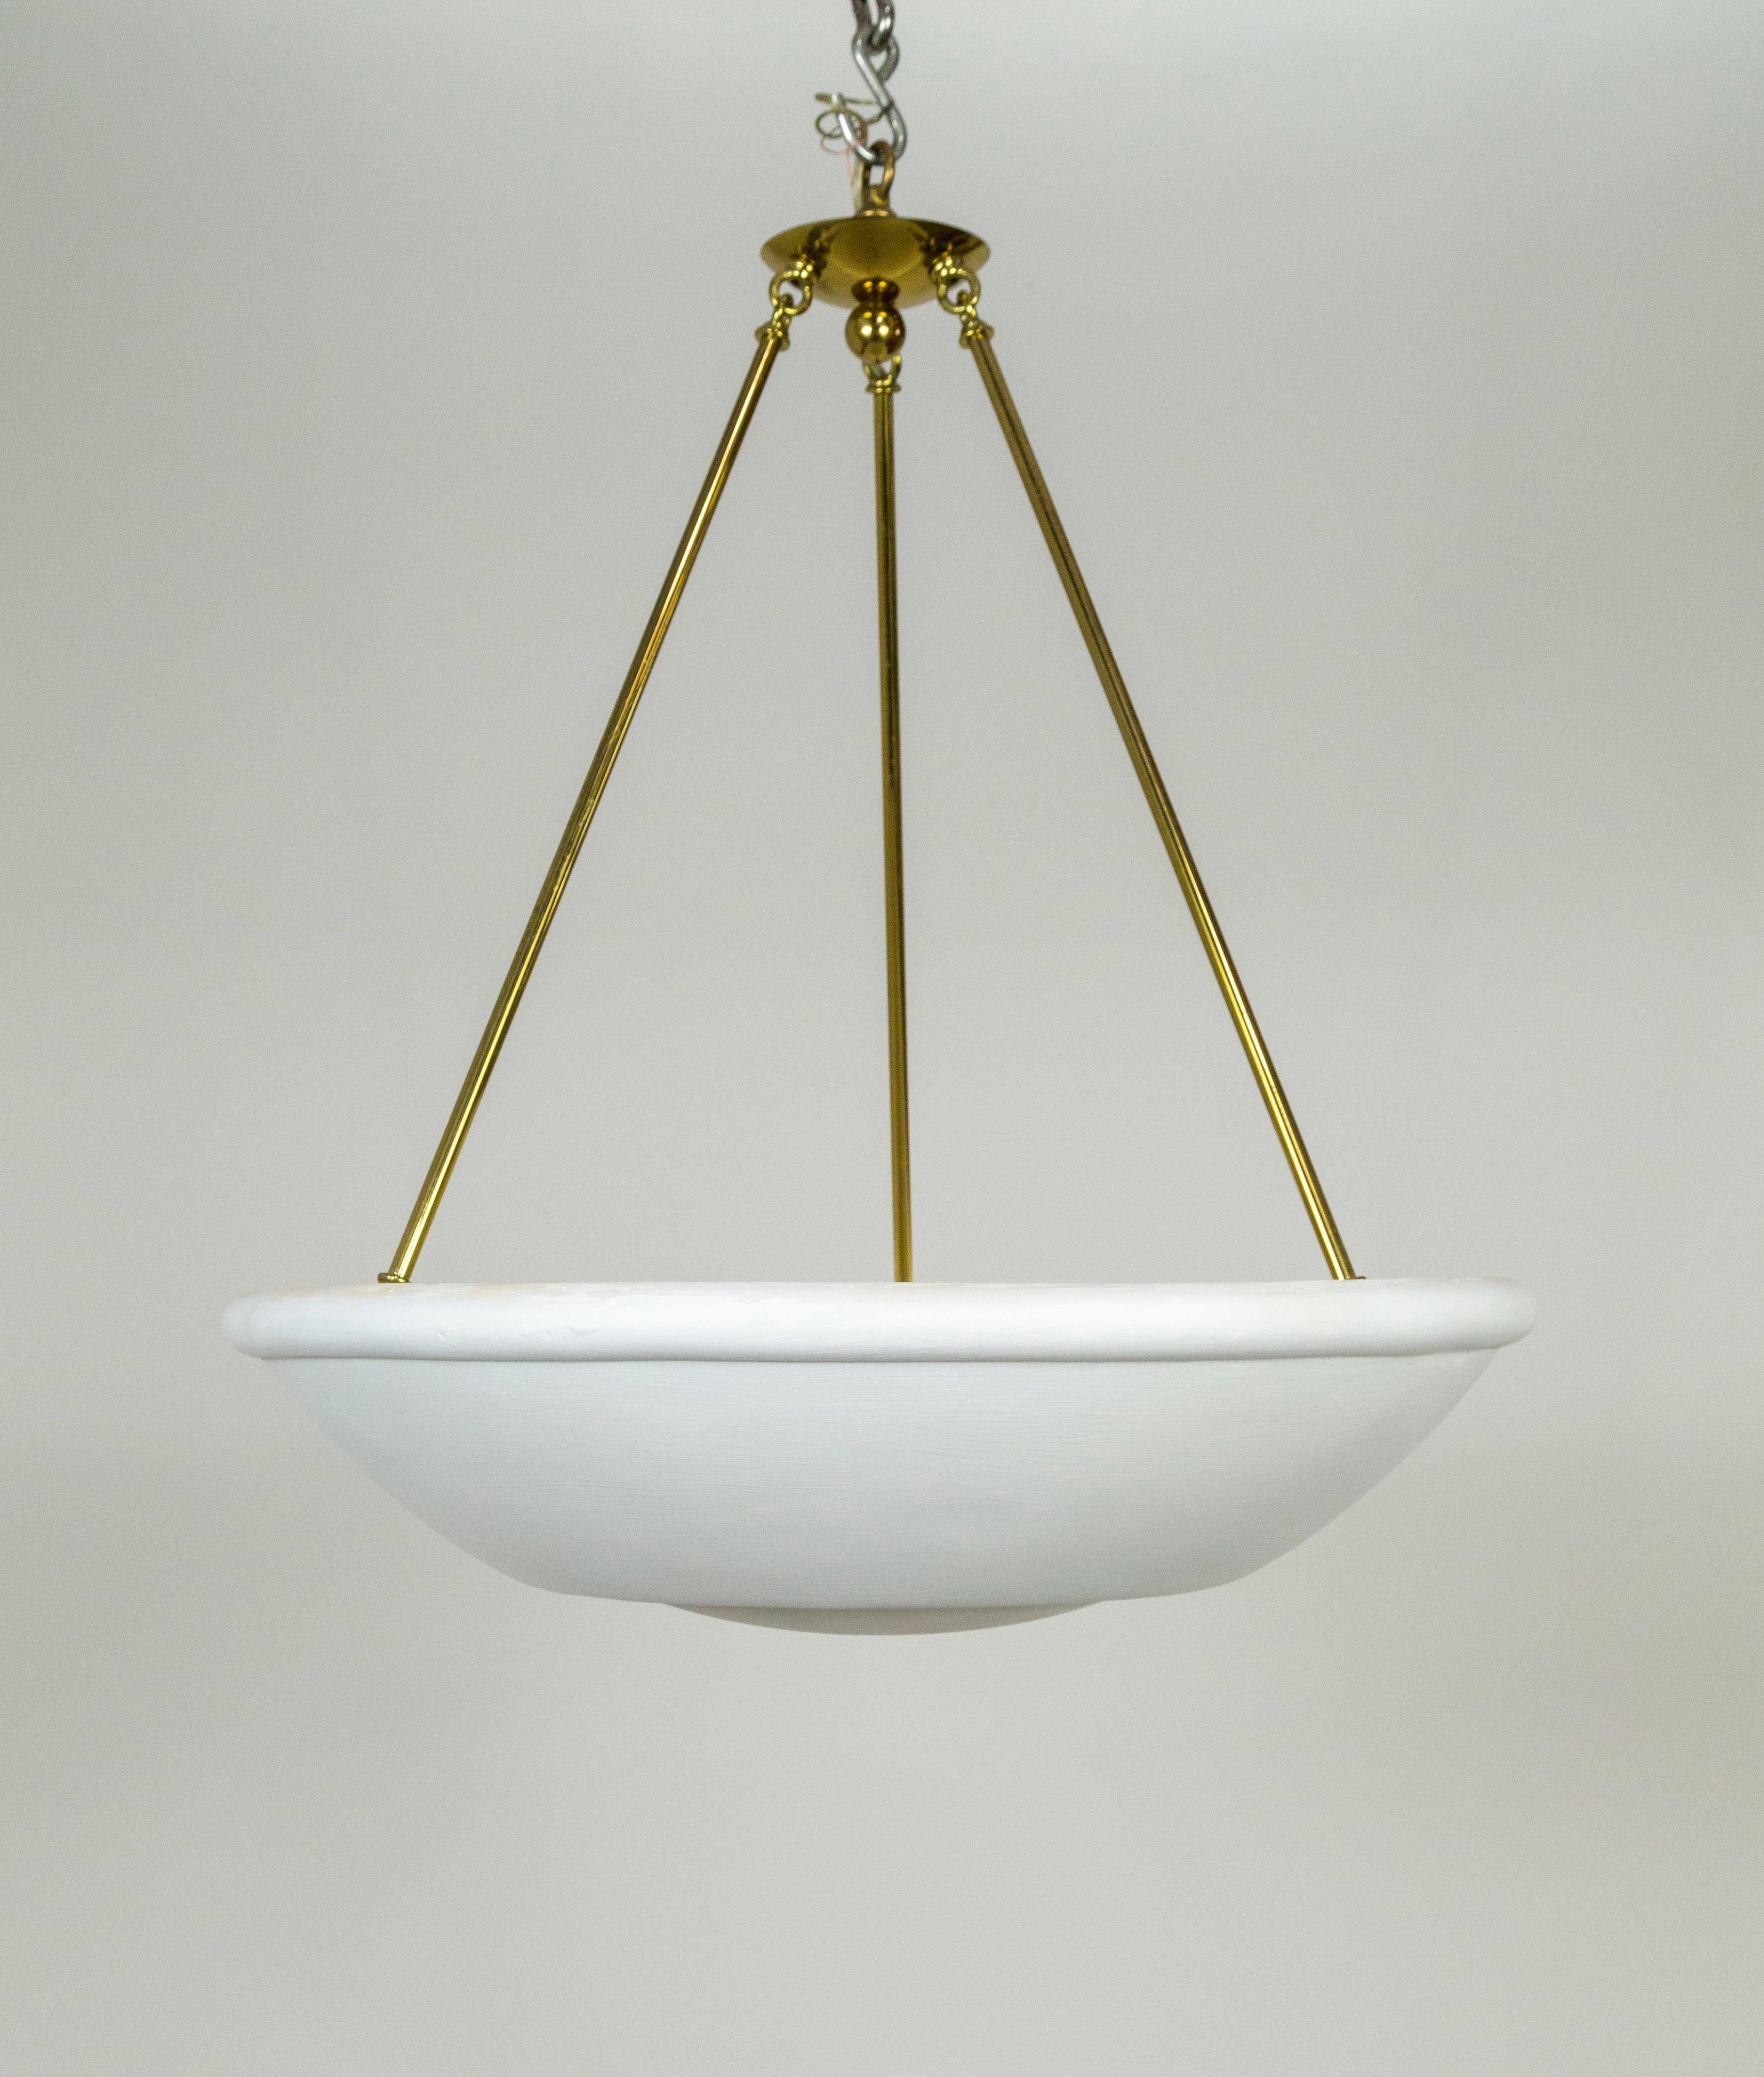 A large, plaster bowl uplight pendant, held by three brass stems coming together in a simple canopy. Designed by Randall Whitehead and made by Phoenix Day of San Francisco in the late 1980s. With a circular ridge on the bottom for added detail and